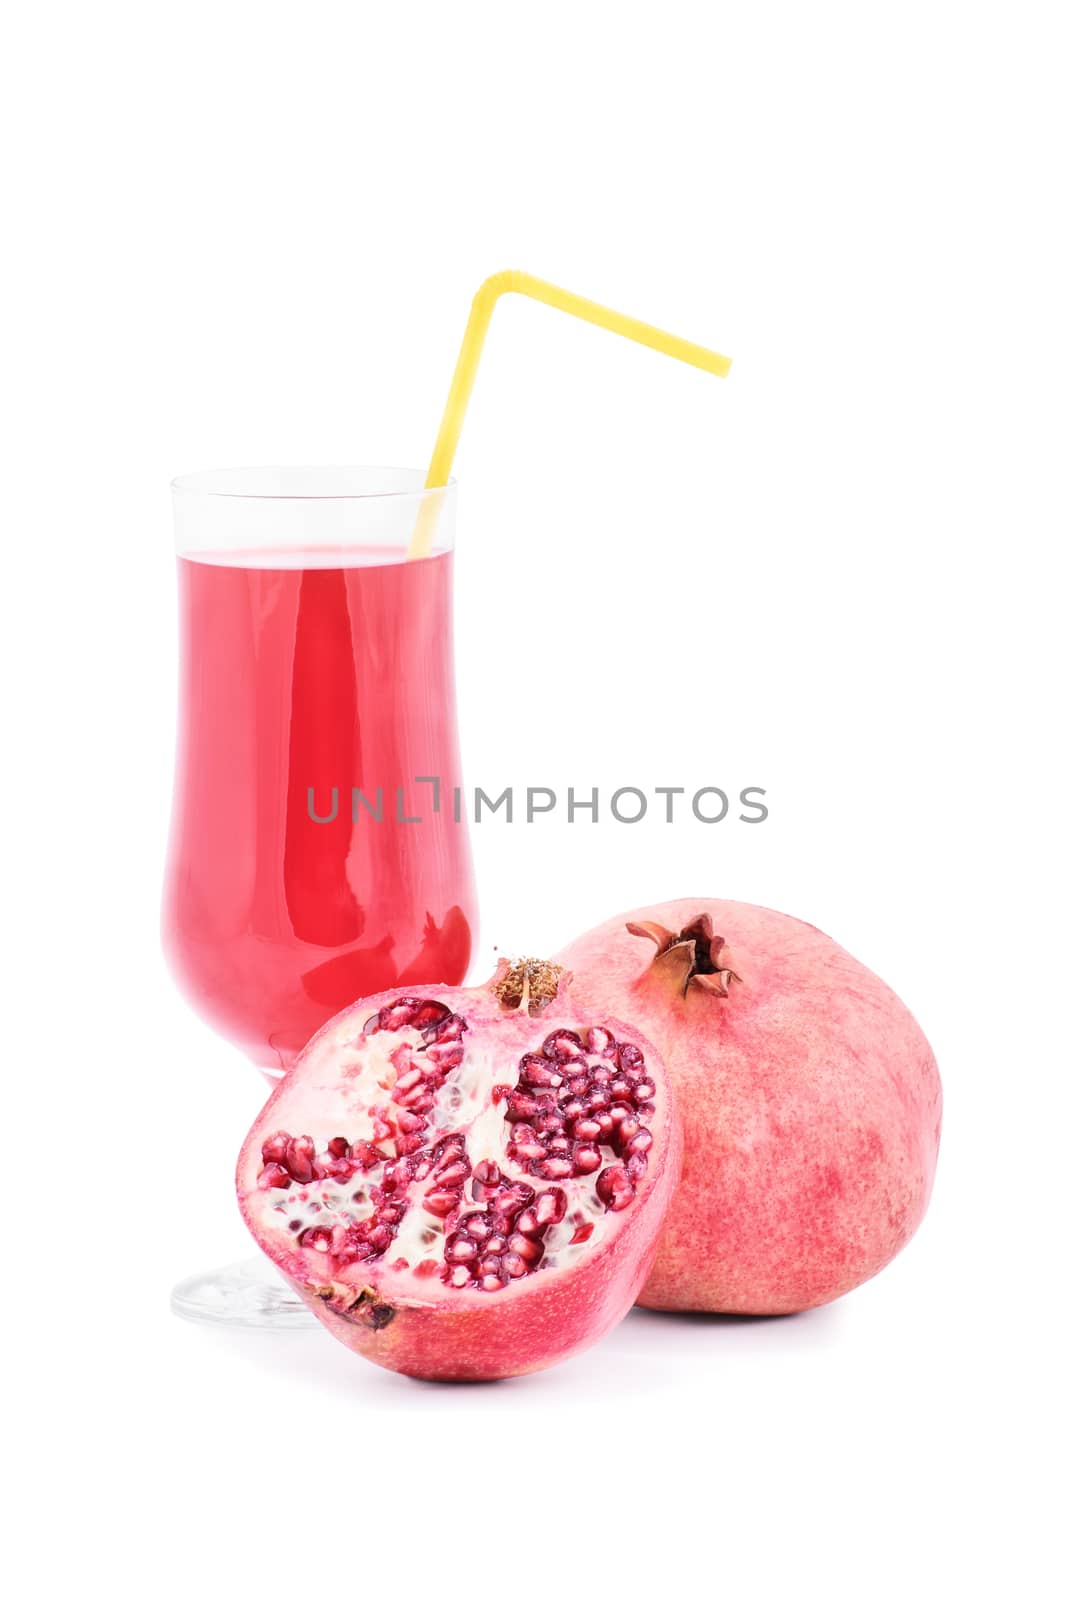 Ripe pomegranate with glass of pomegranate juice, isolated on white background.